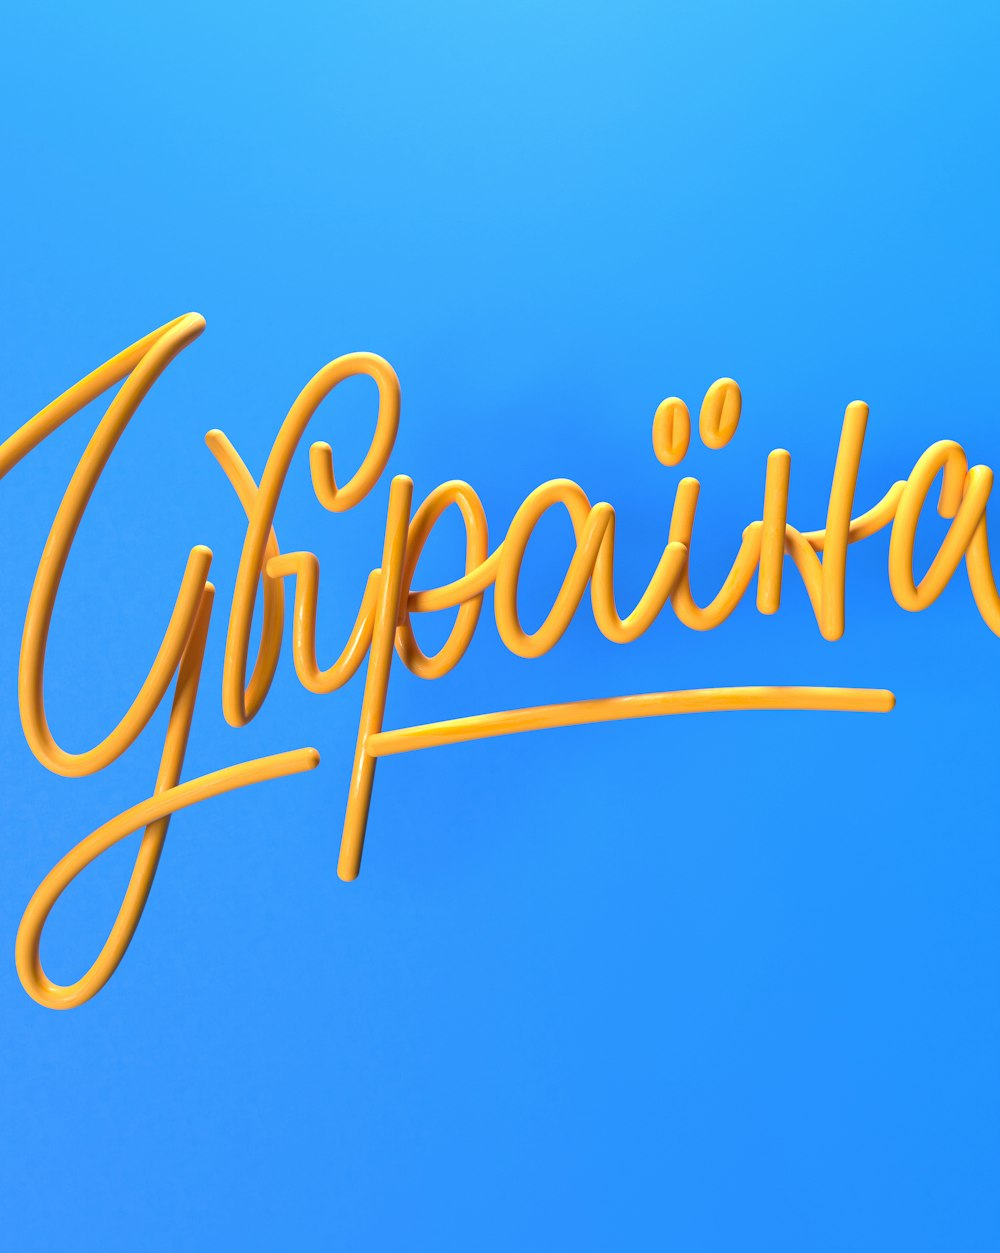 a word that is written in cursive writing on a blue background